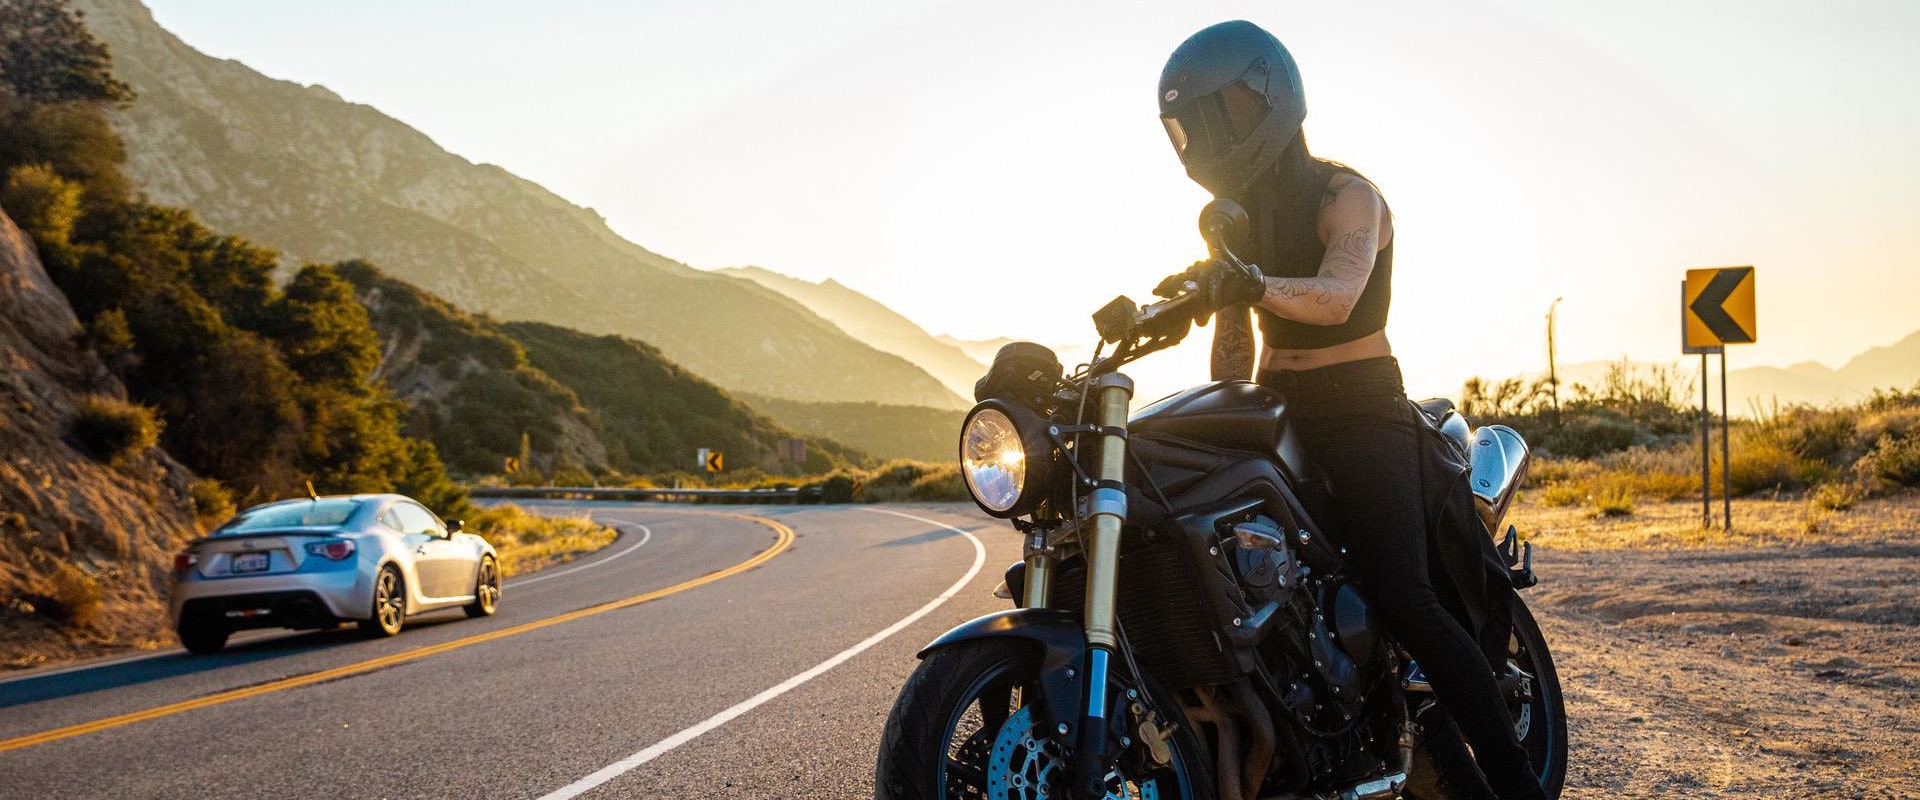 Minimum Motorcycle Insurance for College Students